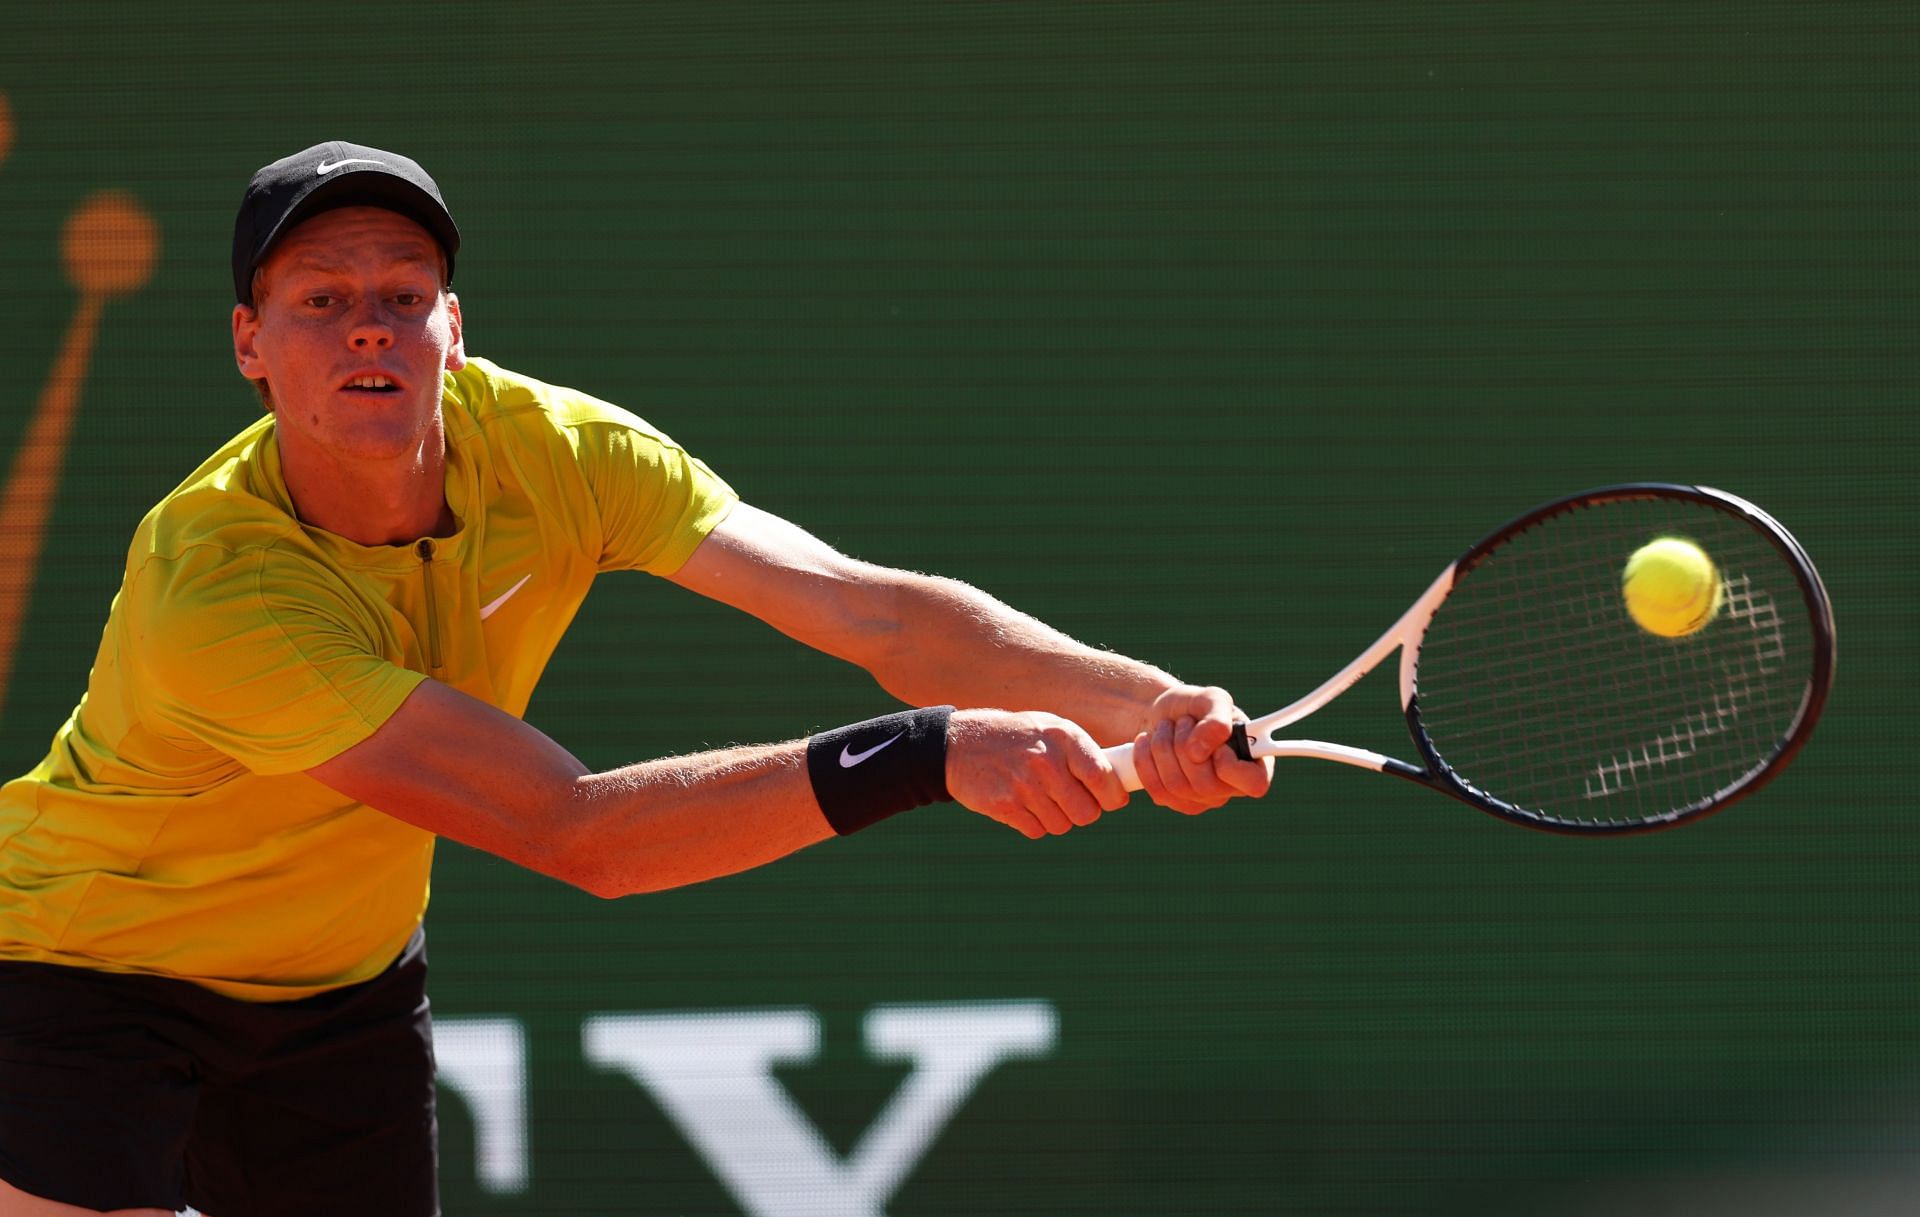 Sinner is looking to reach his first Monte-Carlo final.